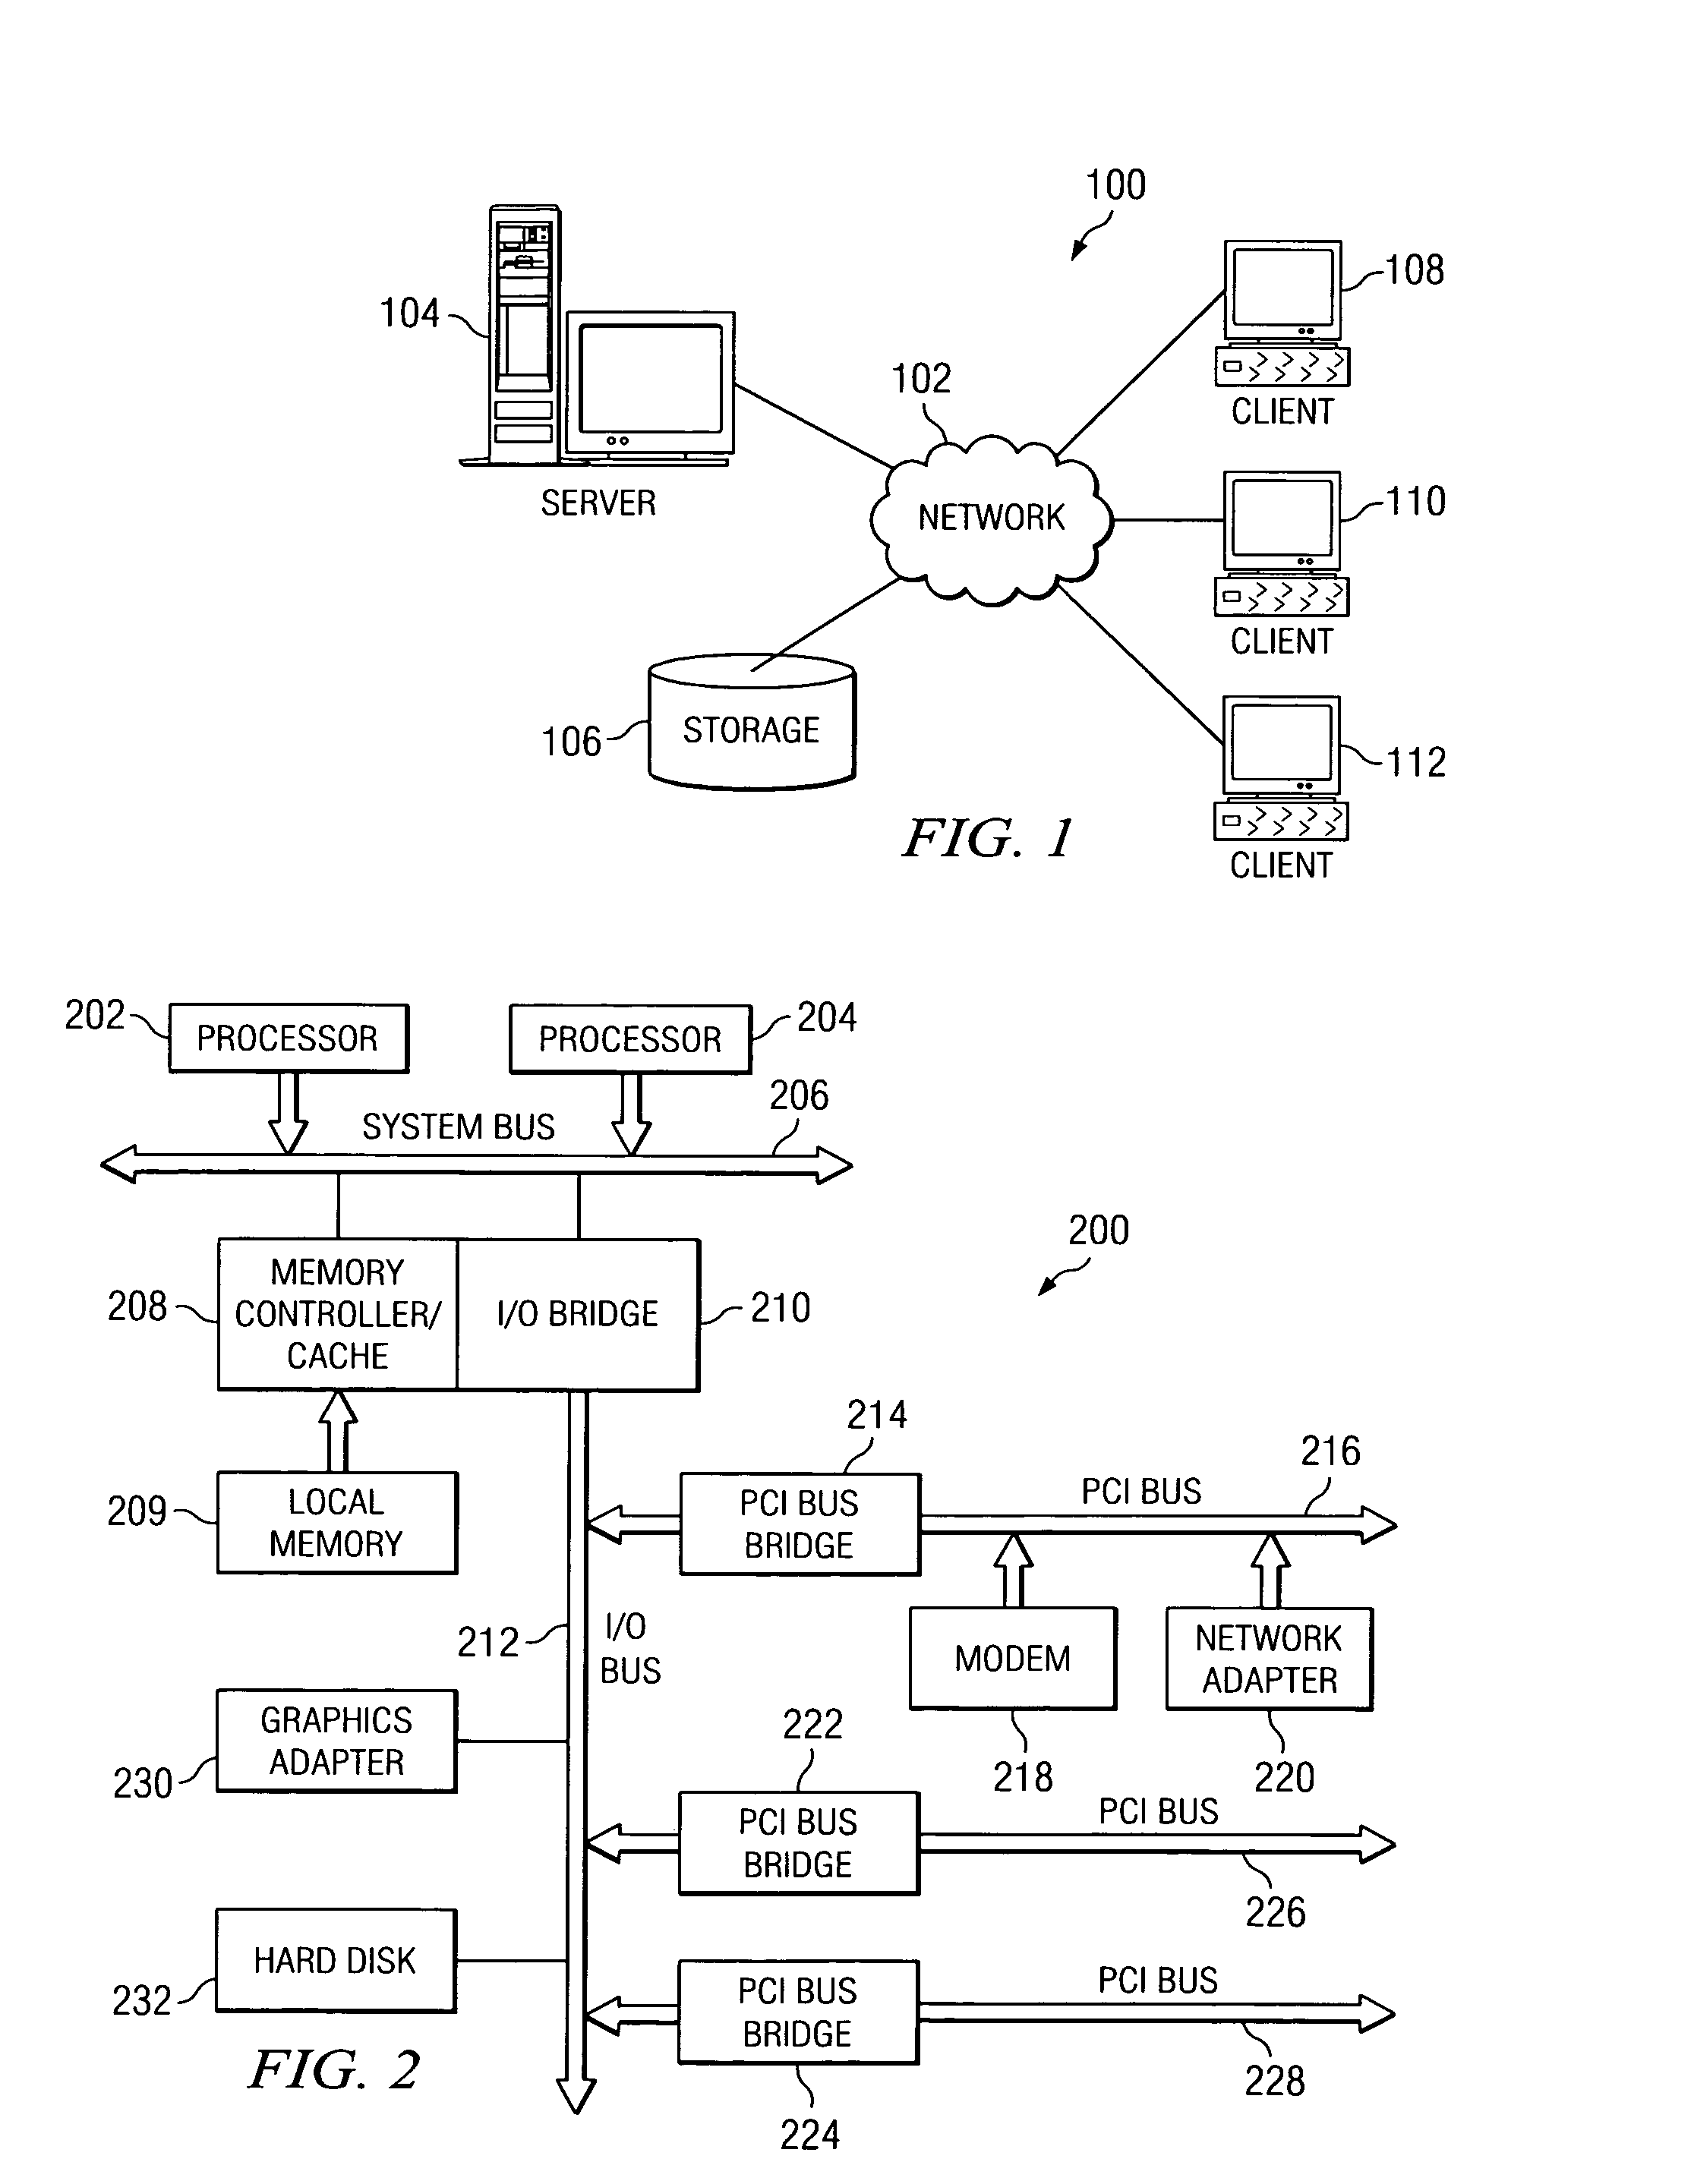 Method for determining availability of participation in instant messaging